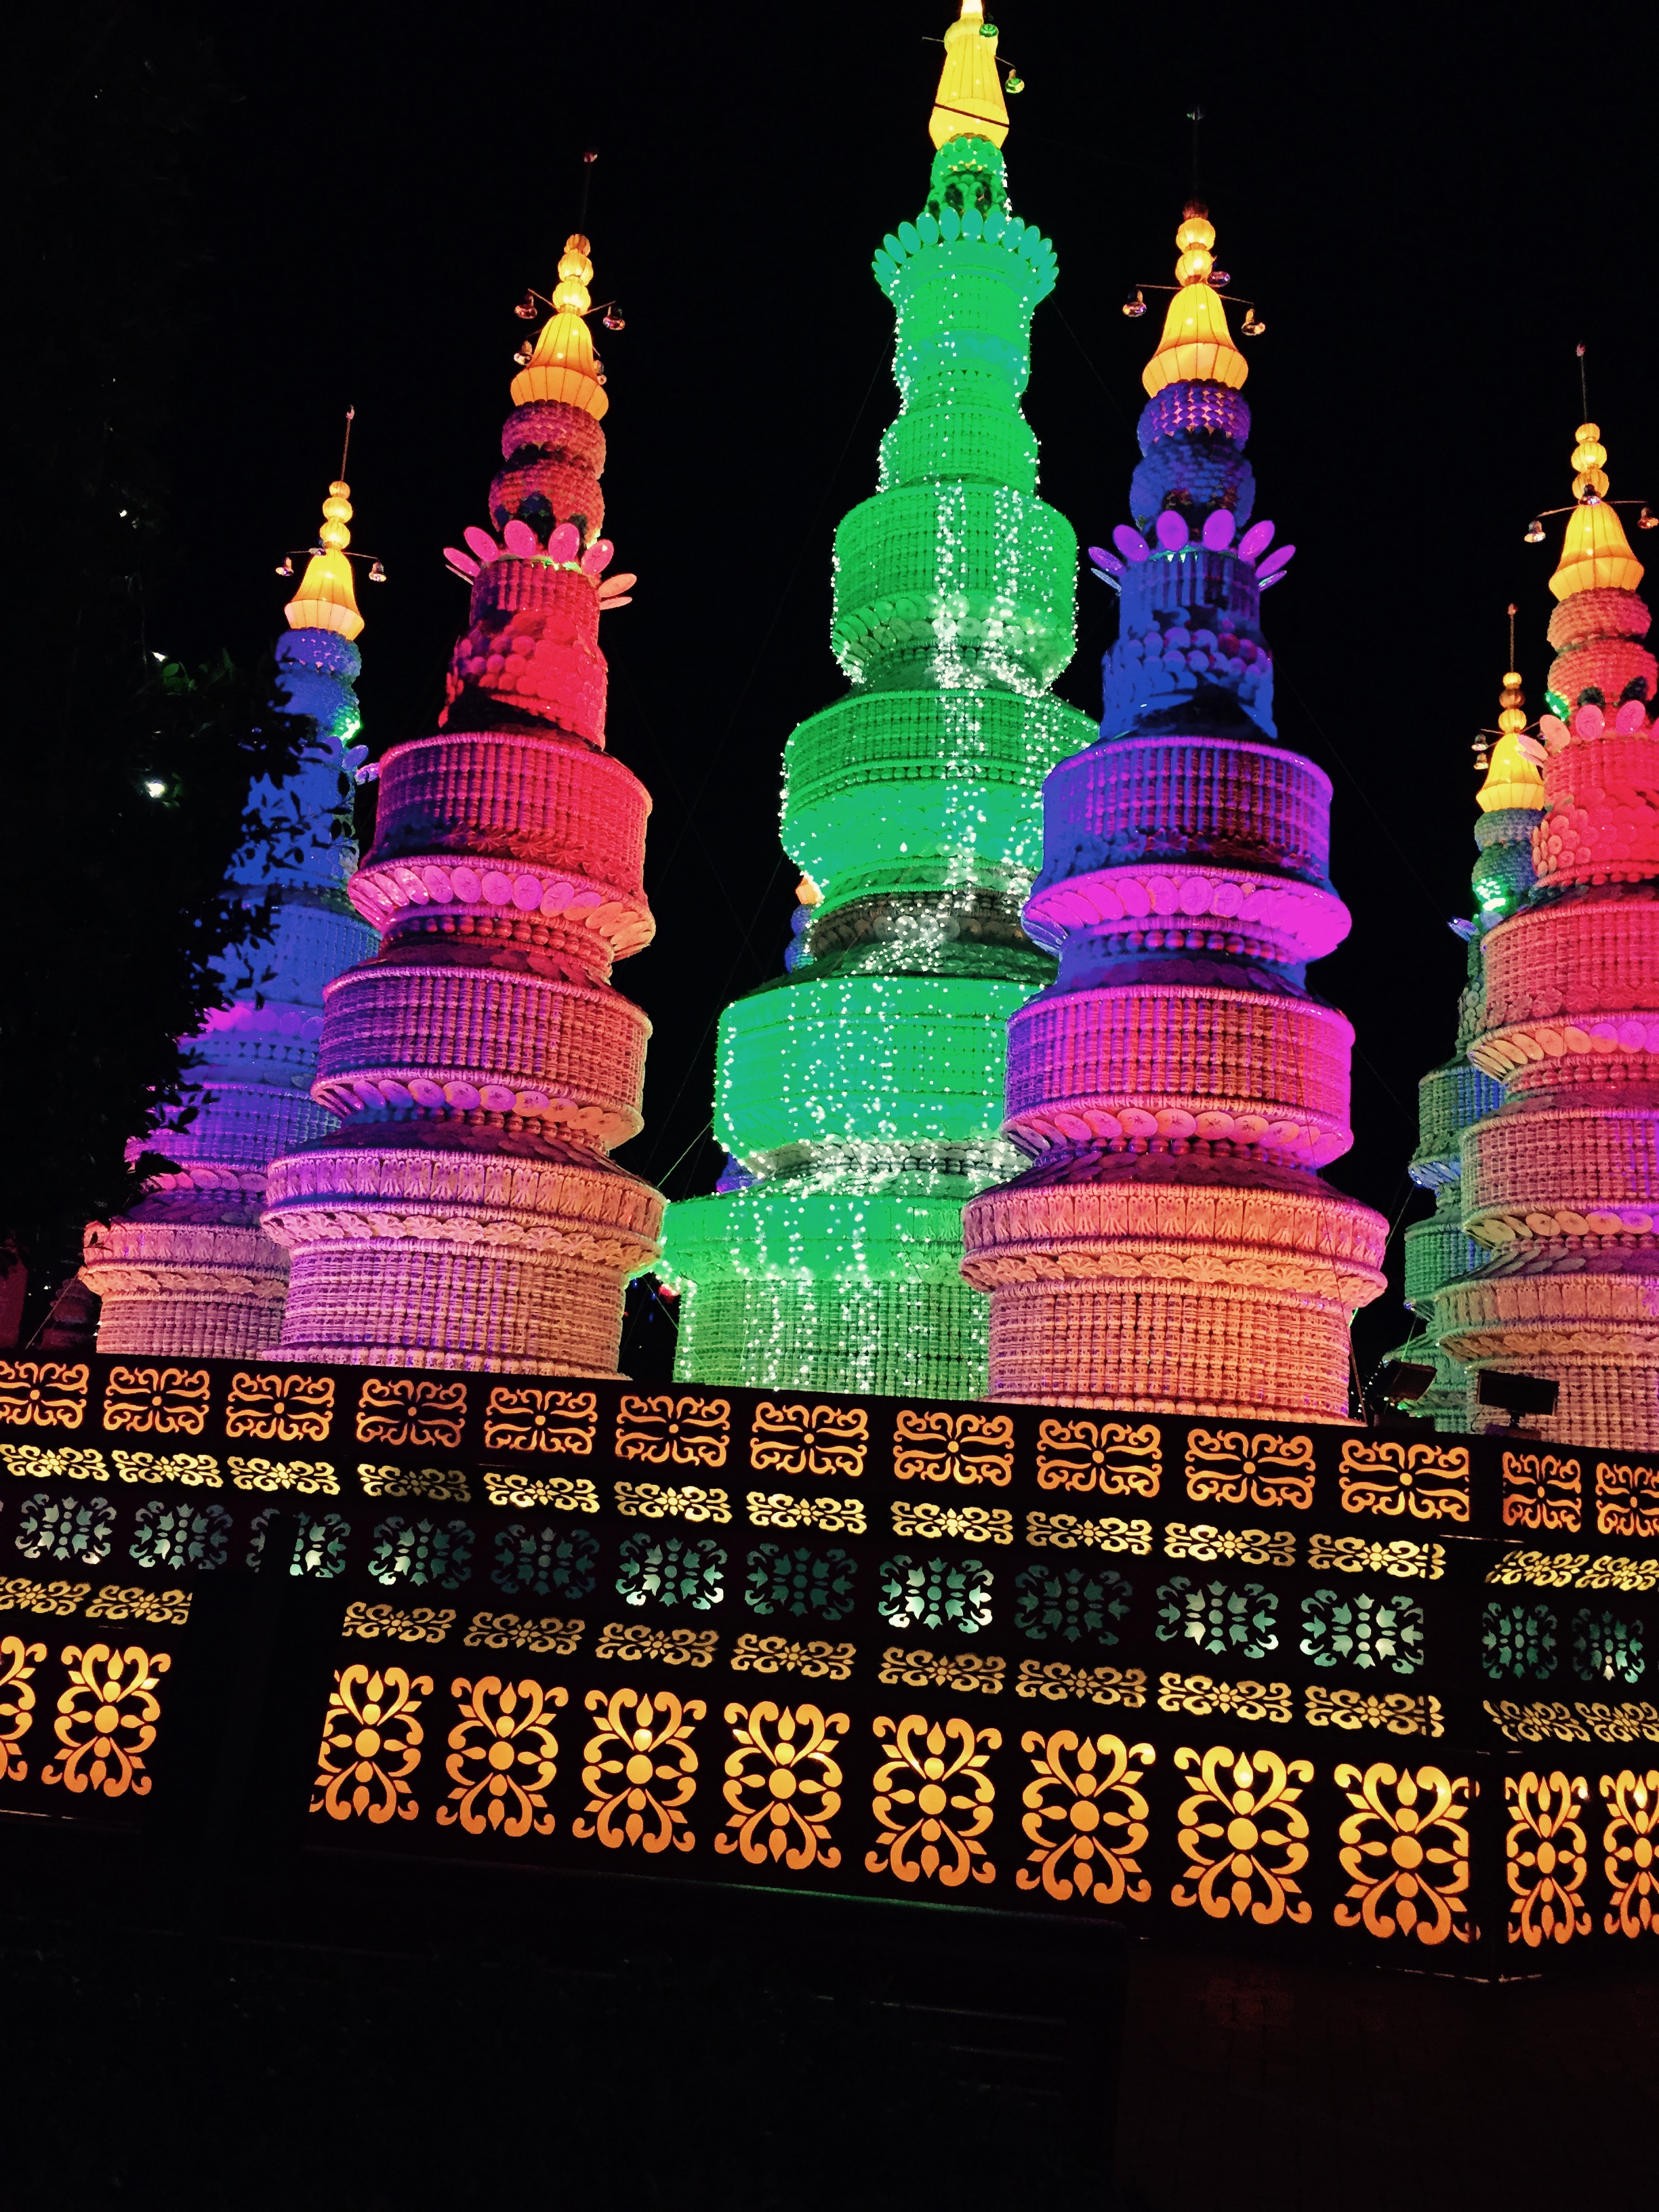 Zoominations Pagoda Made of 63,000 Ceramic Plates and Cups